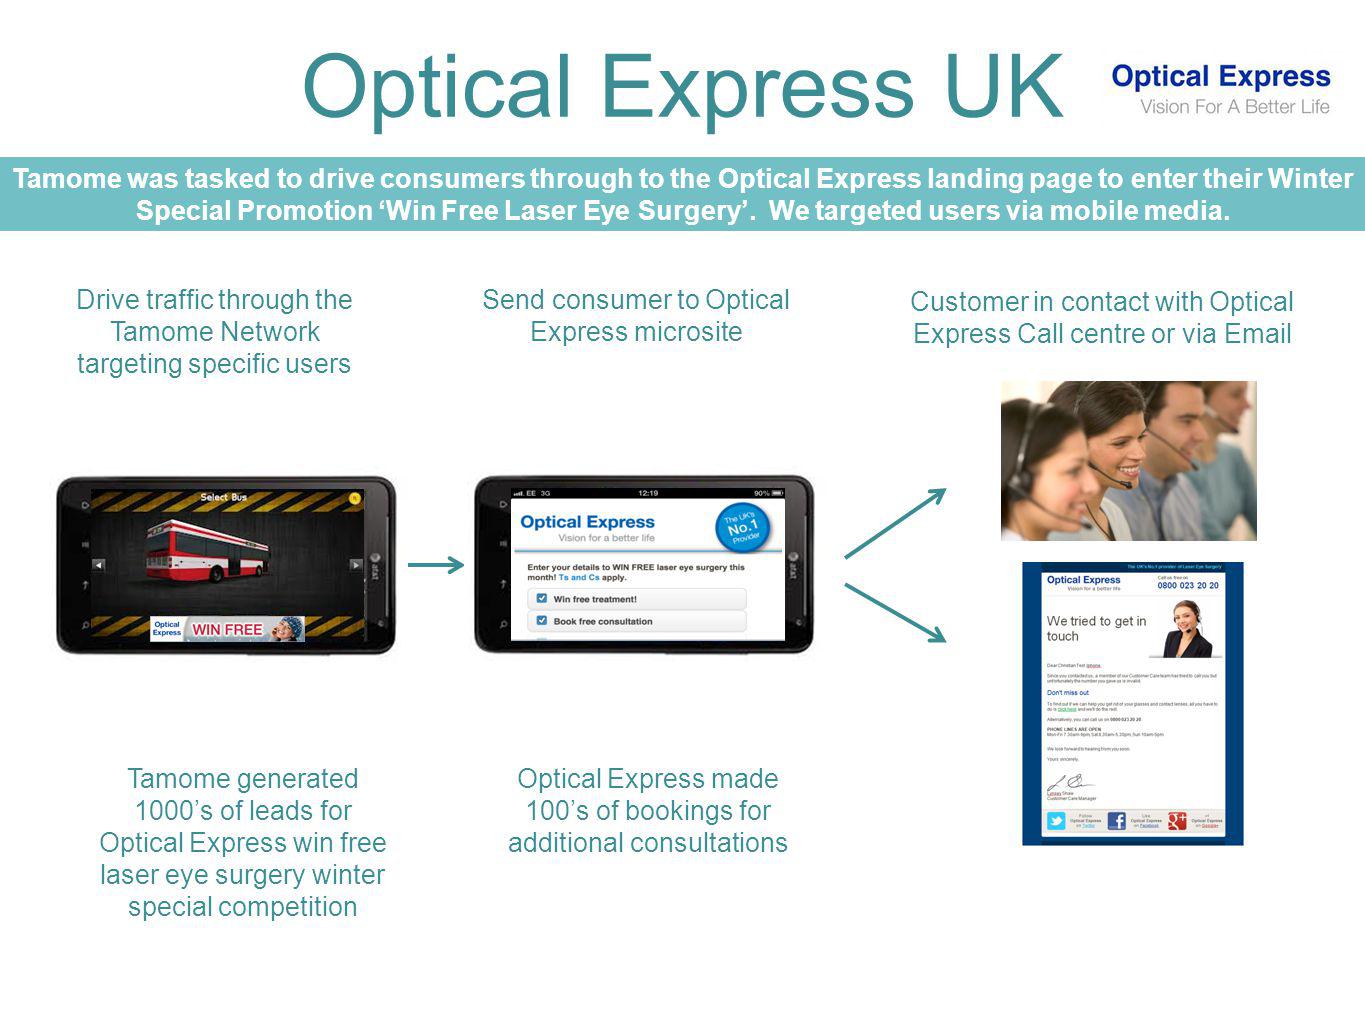 CONFIDENTIAL Optical Express UK Drive traffic through the Tamome Network targeting specific users Send consumer to Optical Express microsite Customer in contact with Optical Express Call centre or via  Tamome generated 1000s of leads for Optical Express win free laser eye surgery winter special competition Tamome was tasked to drive consumers through to the Optical Express landing page to enter their Winter Special Promotion Win Free Laser Eye Surgery.